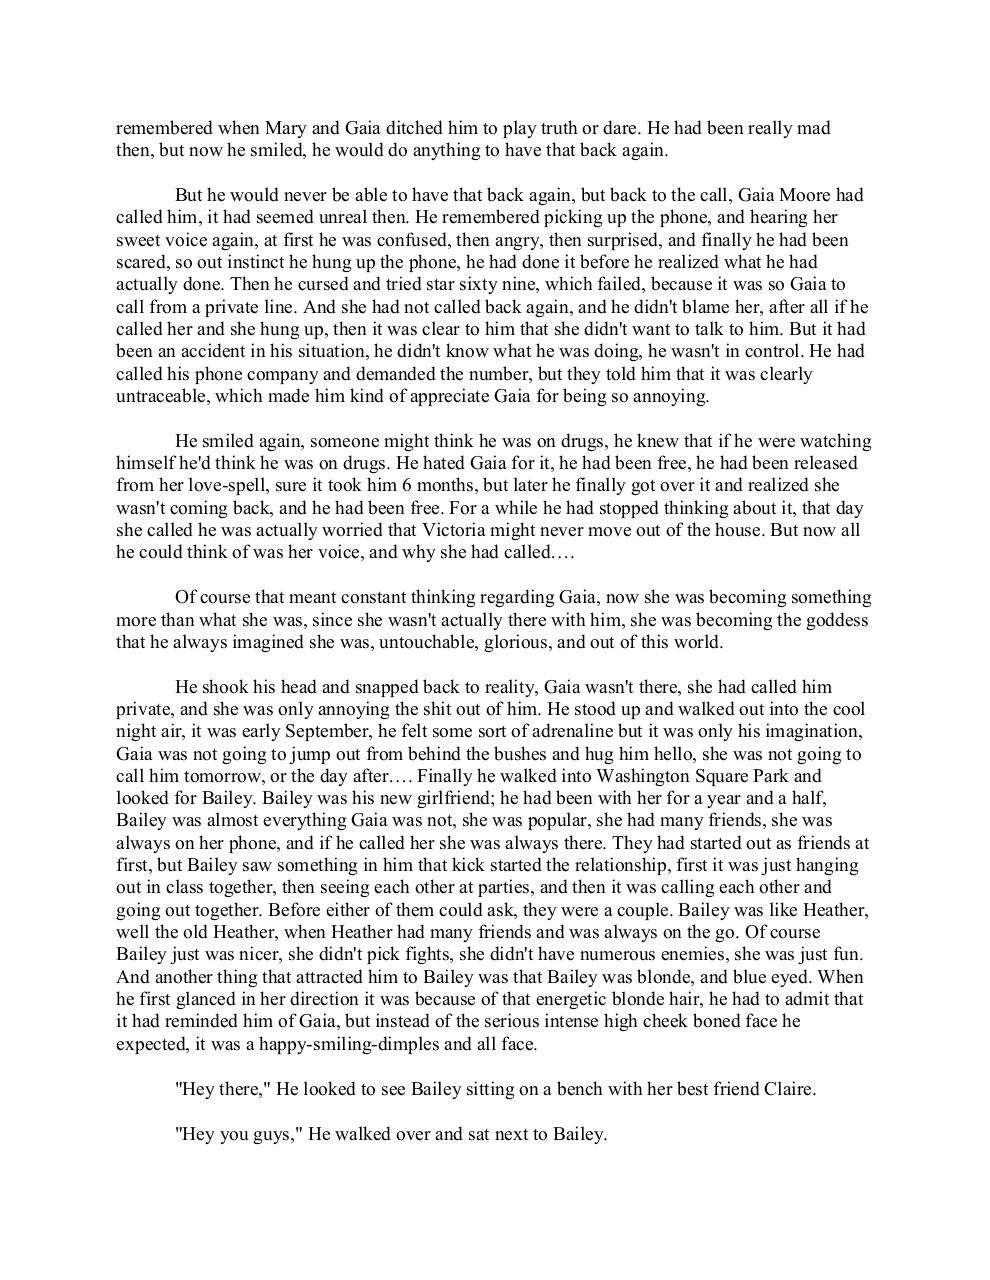 Chapter 1 - The Gaia Moore Call.pdf - page 4/7